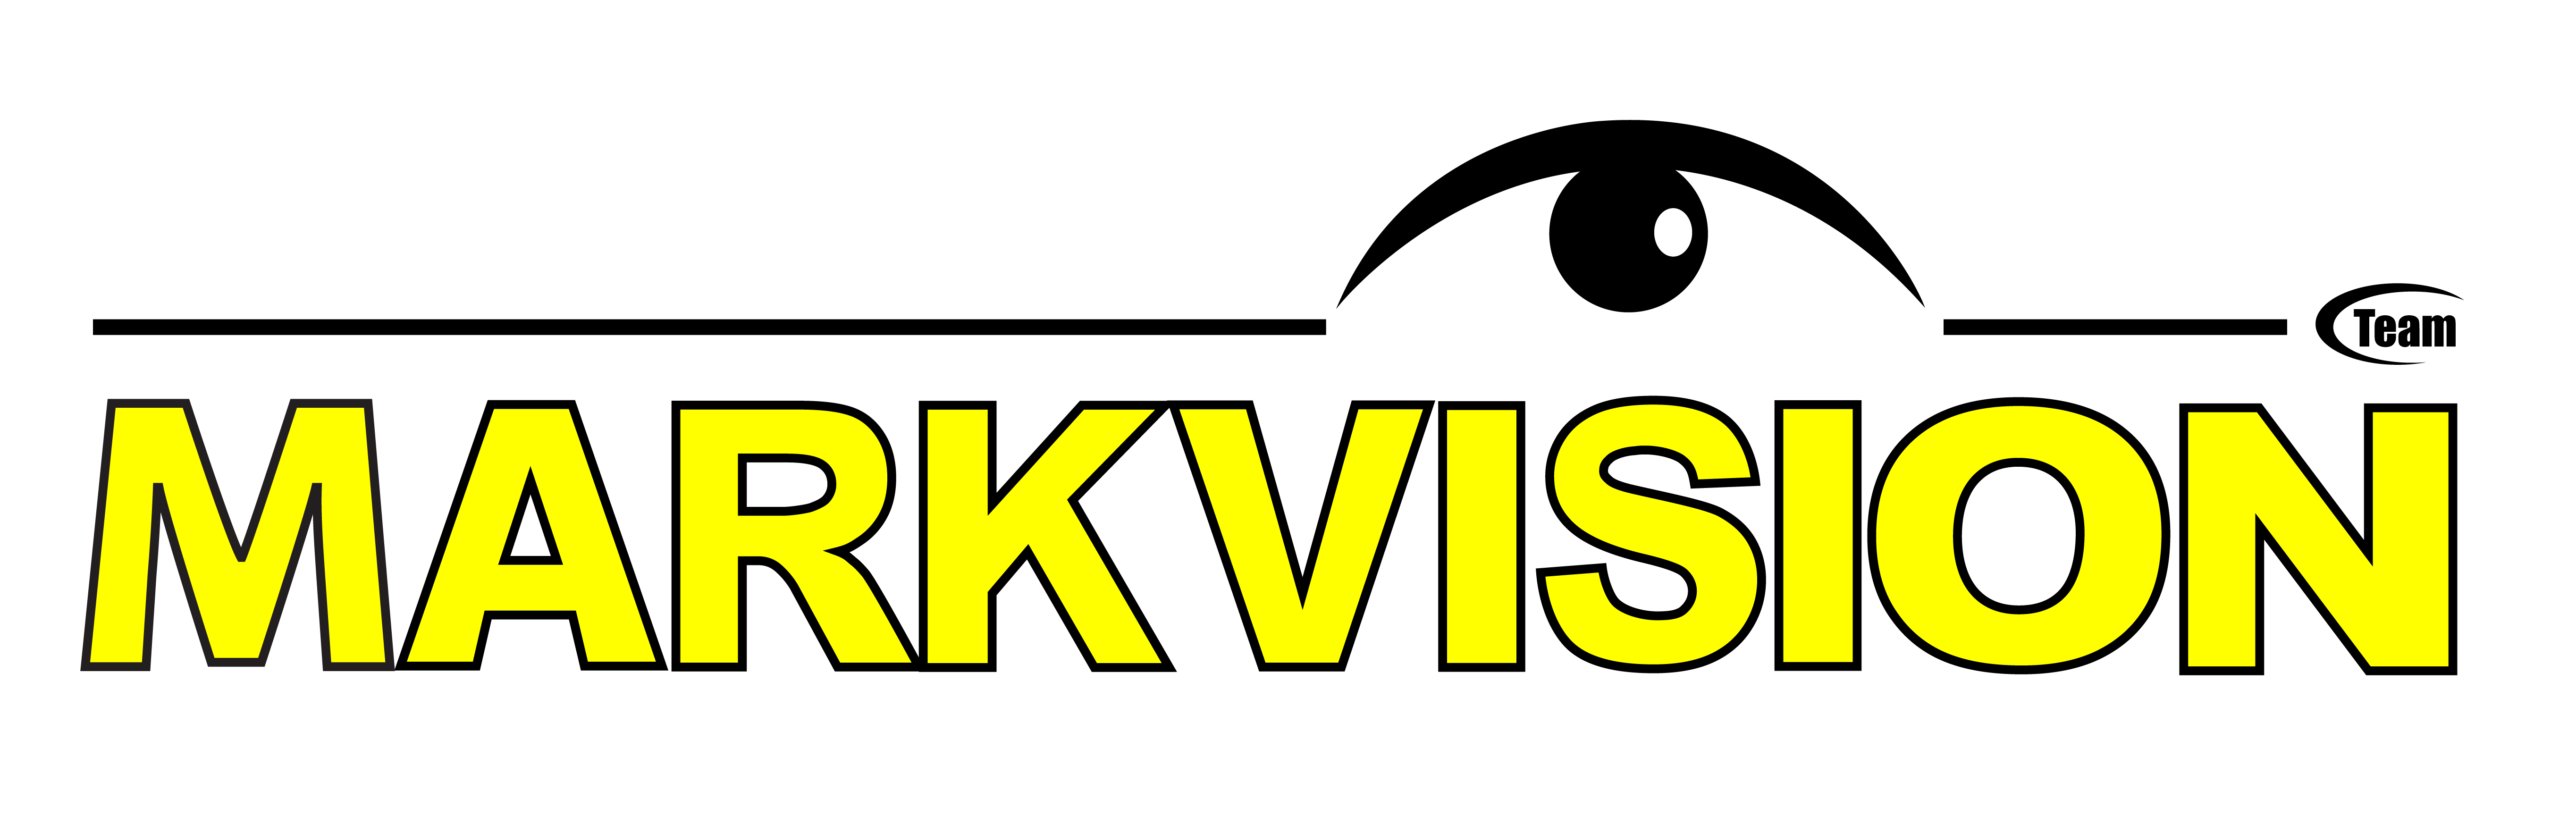 image-682793-MarkVision_Logo_A.png